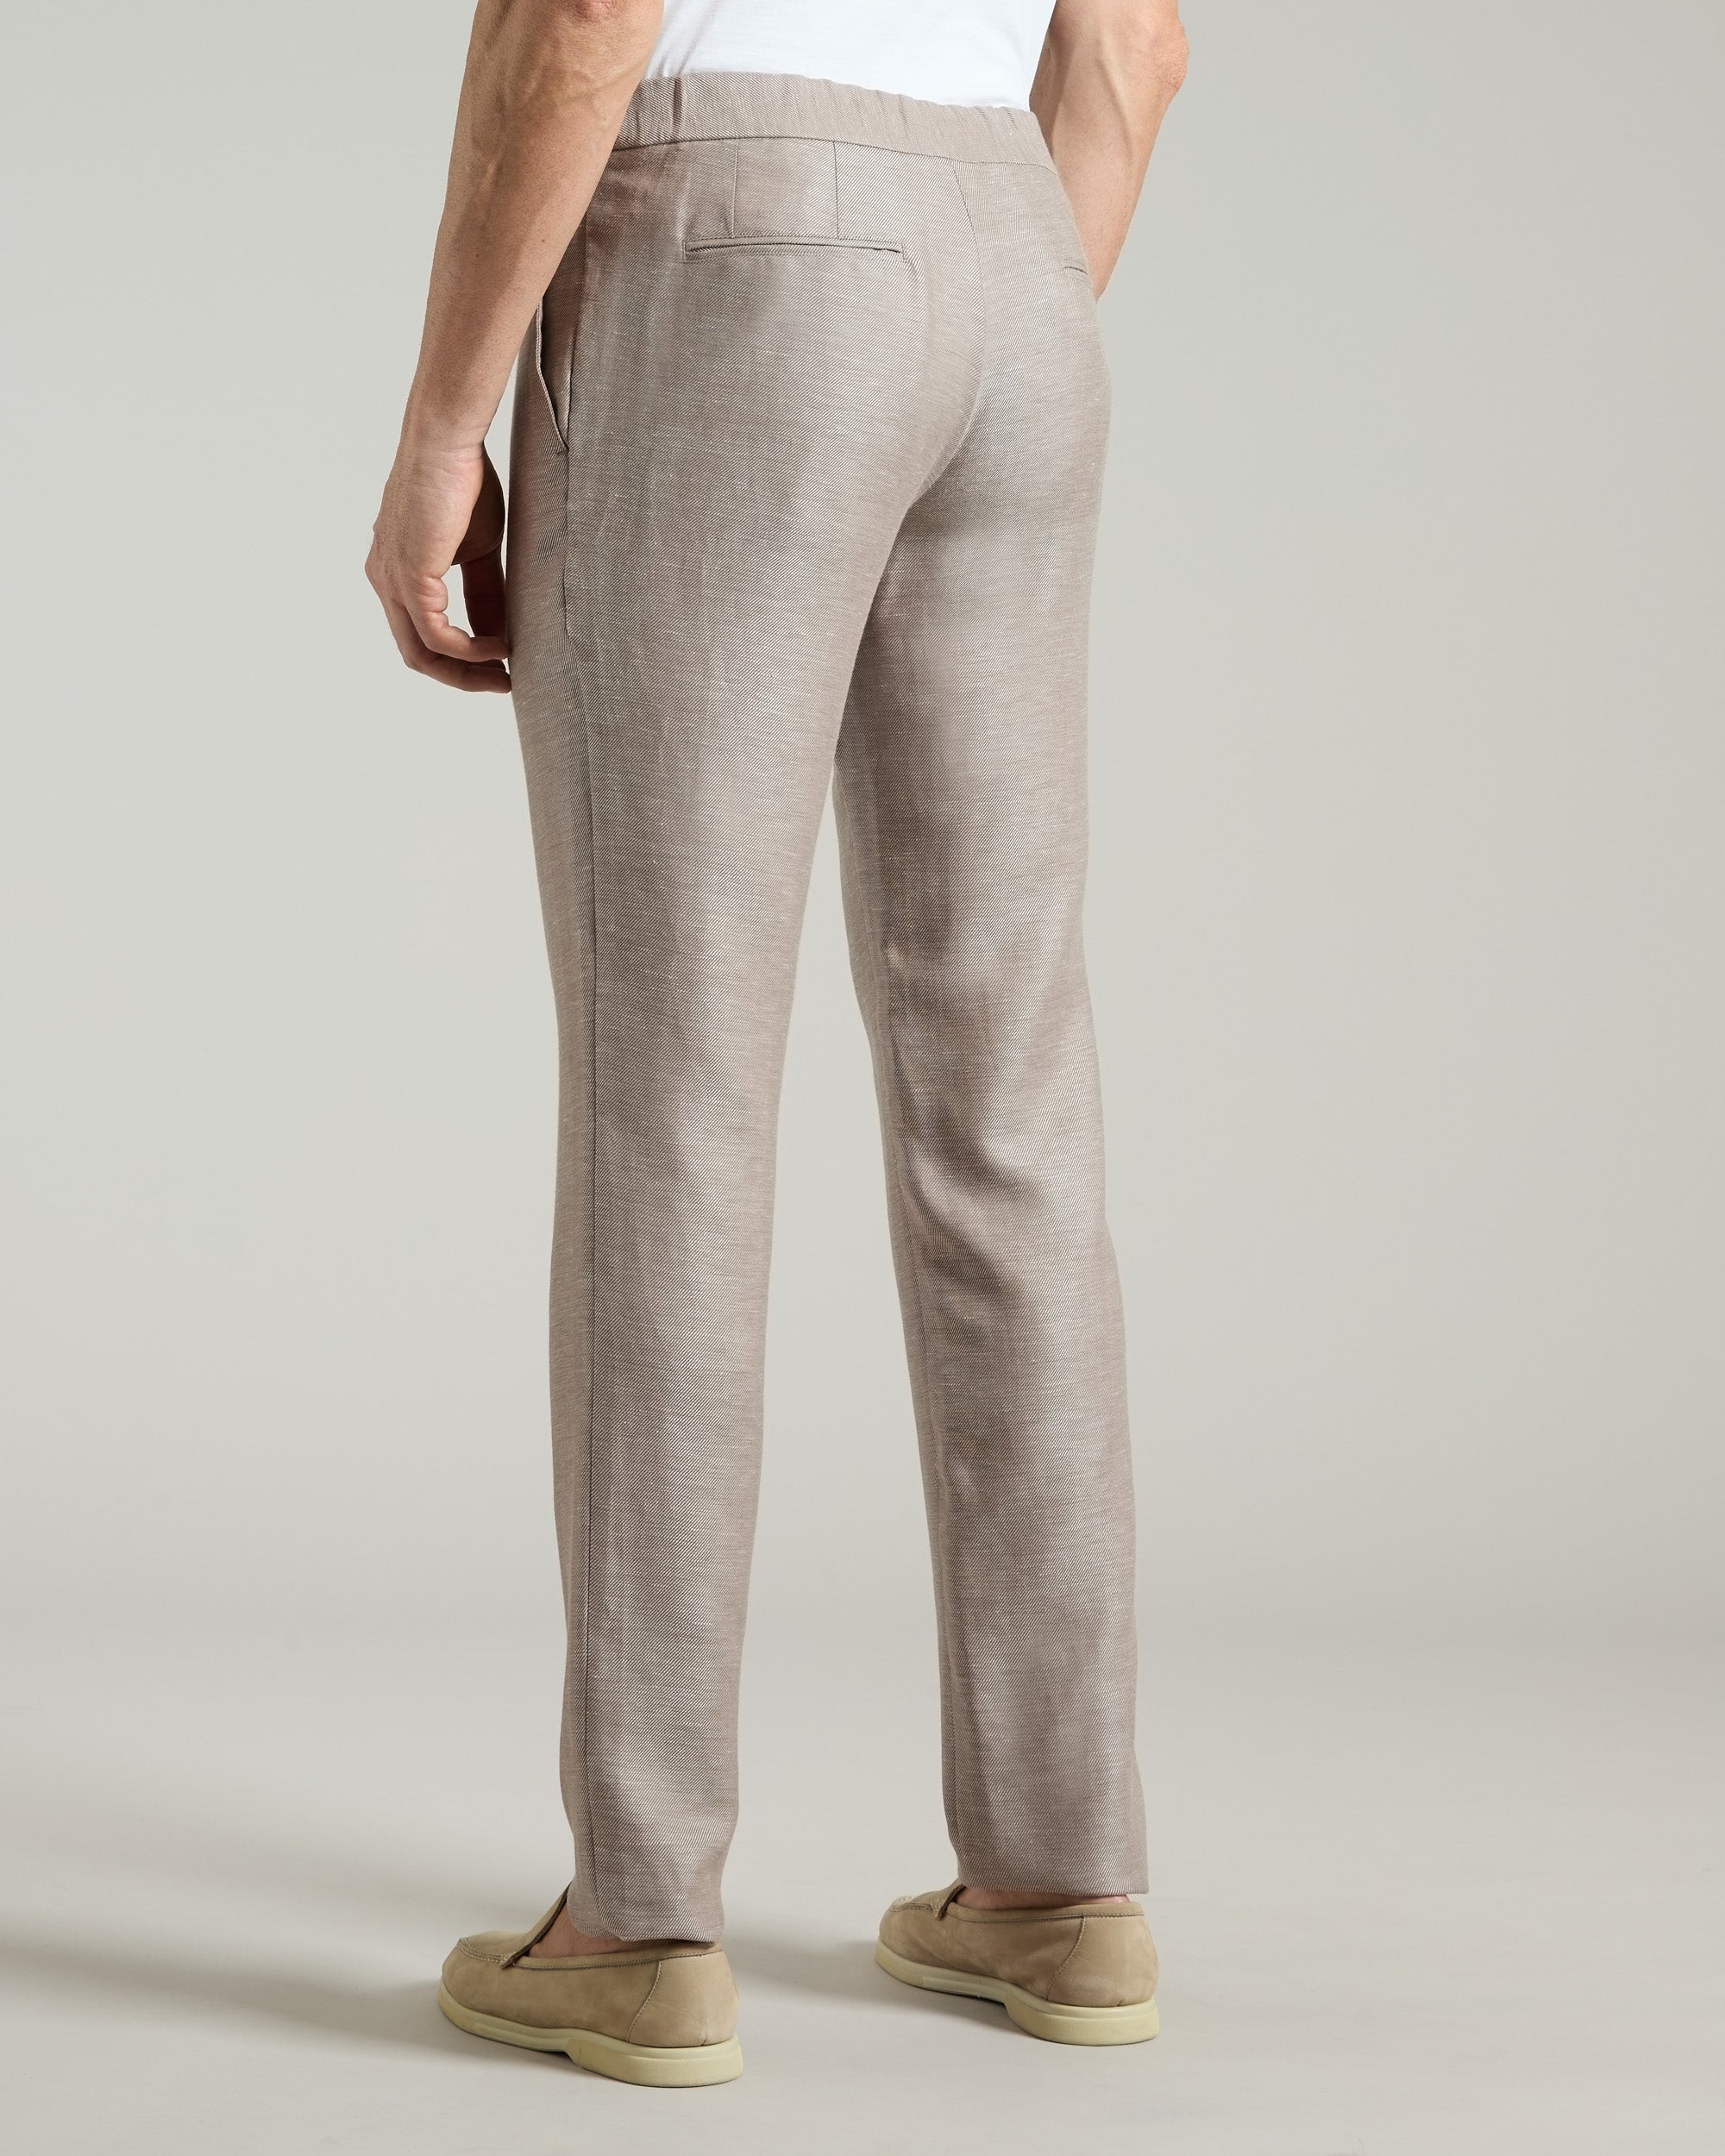 Brown pants in Summer Cashmere 4.0